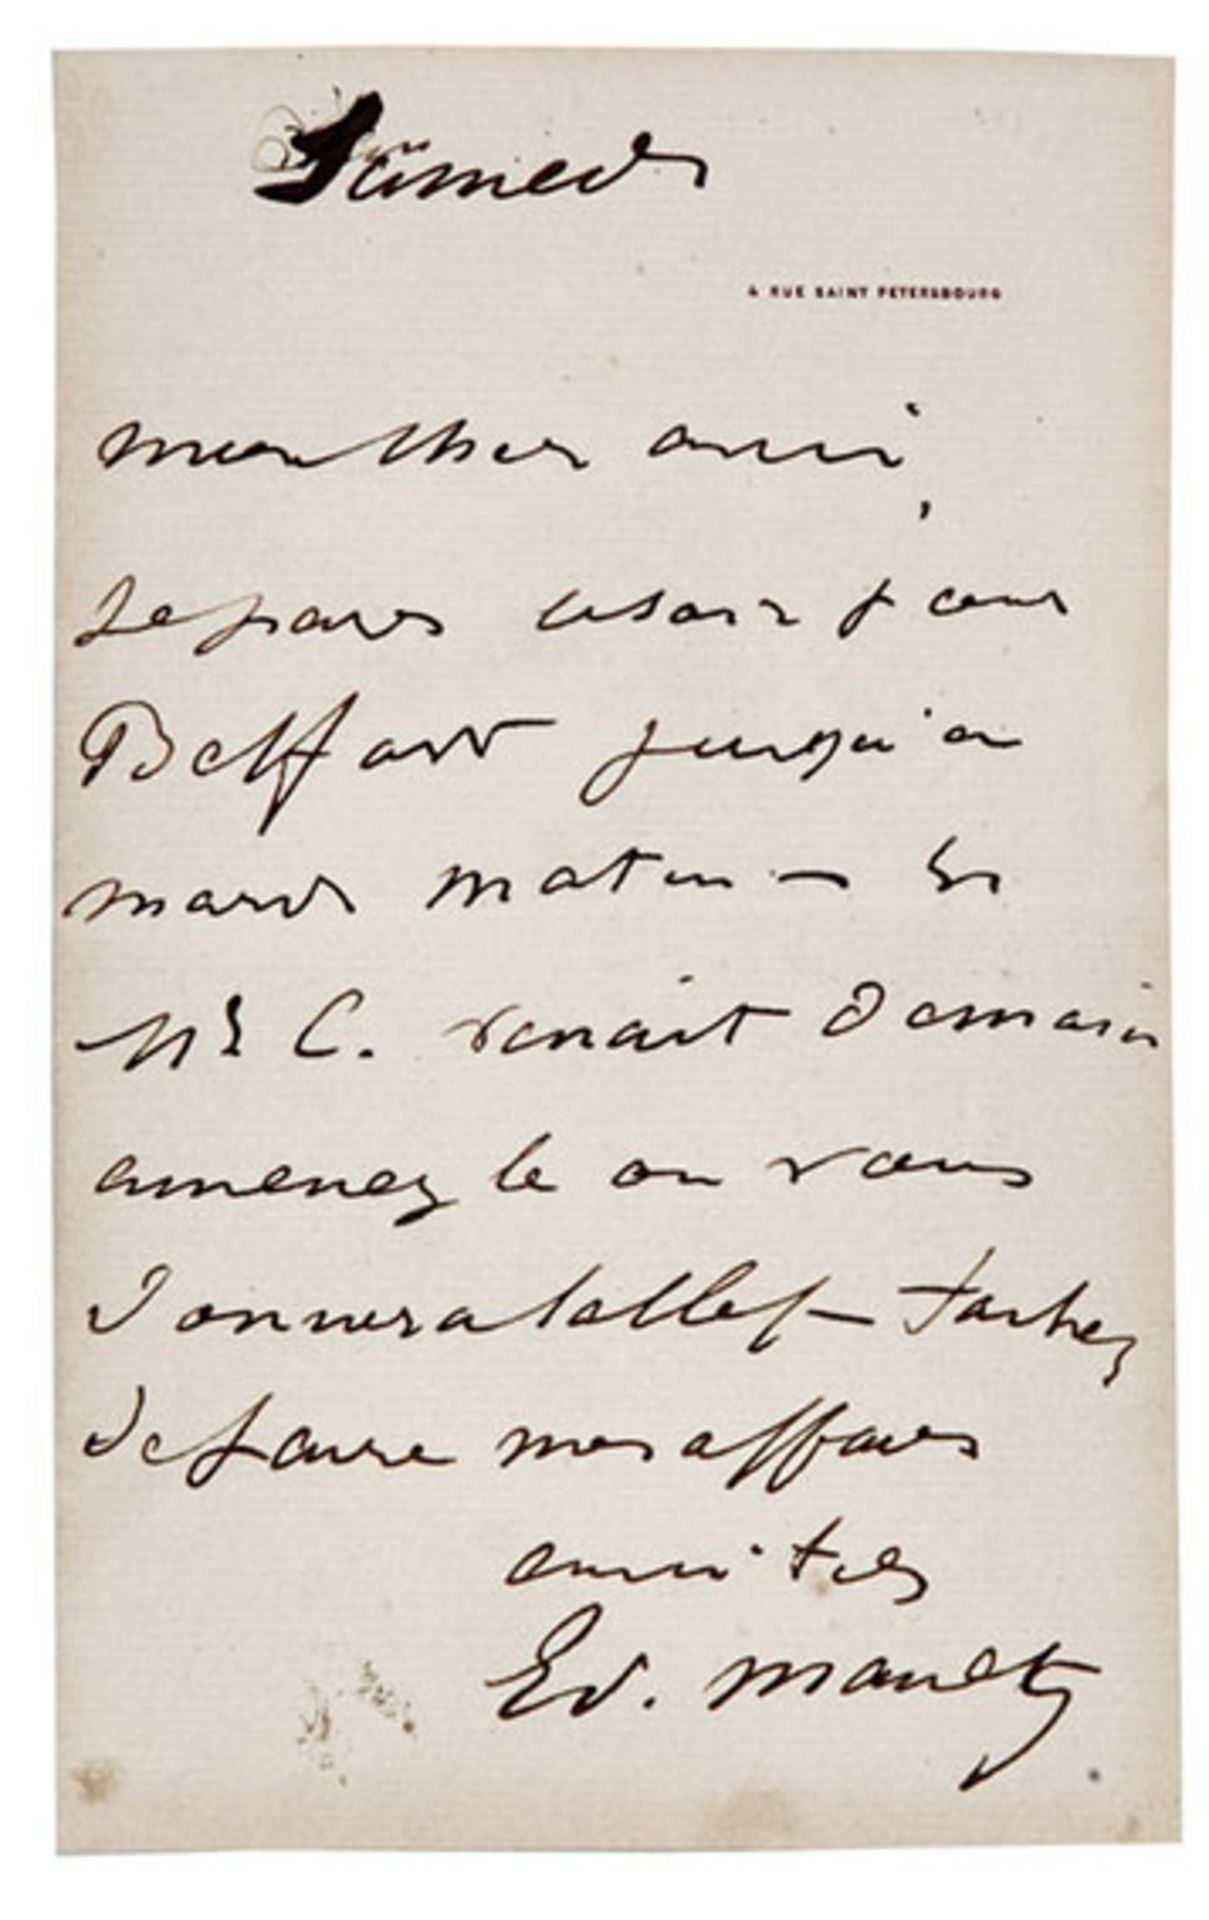 MANET, Édouard (1832-1883). Signed autograph letter in French. N.d. Announcement of 10 lines to